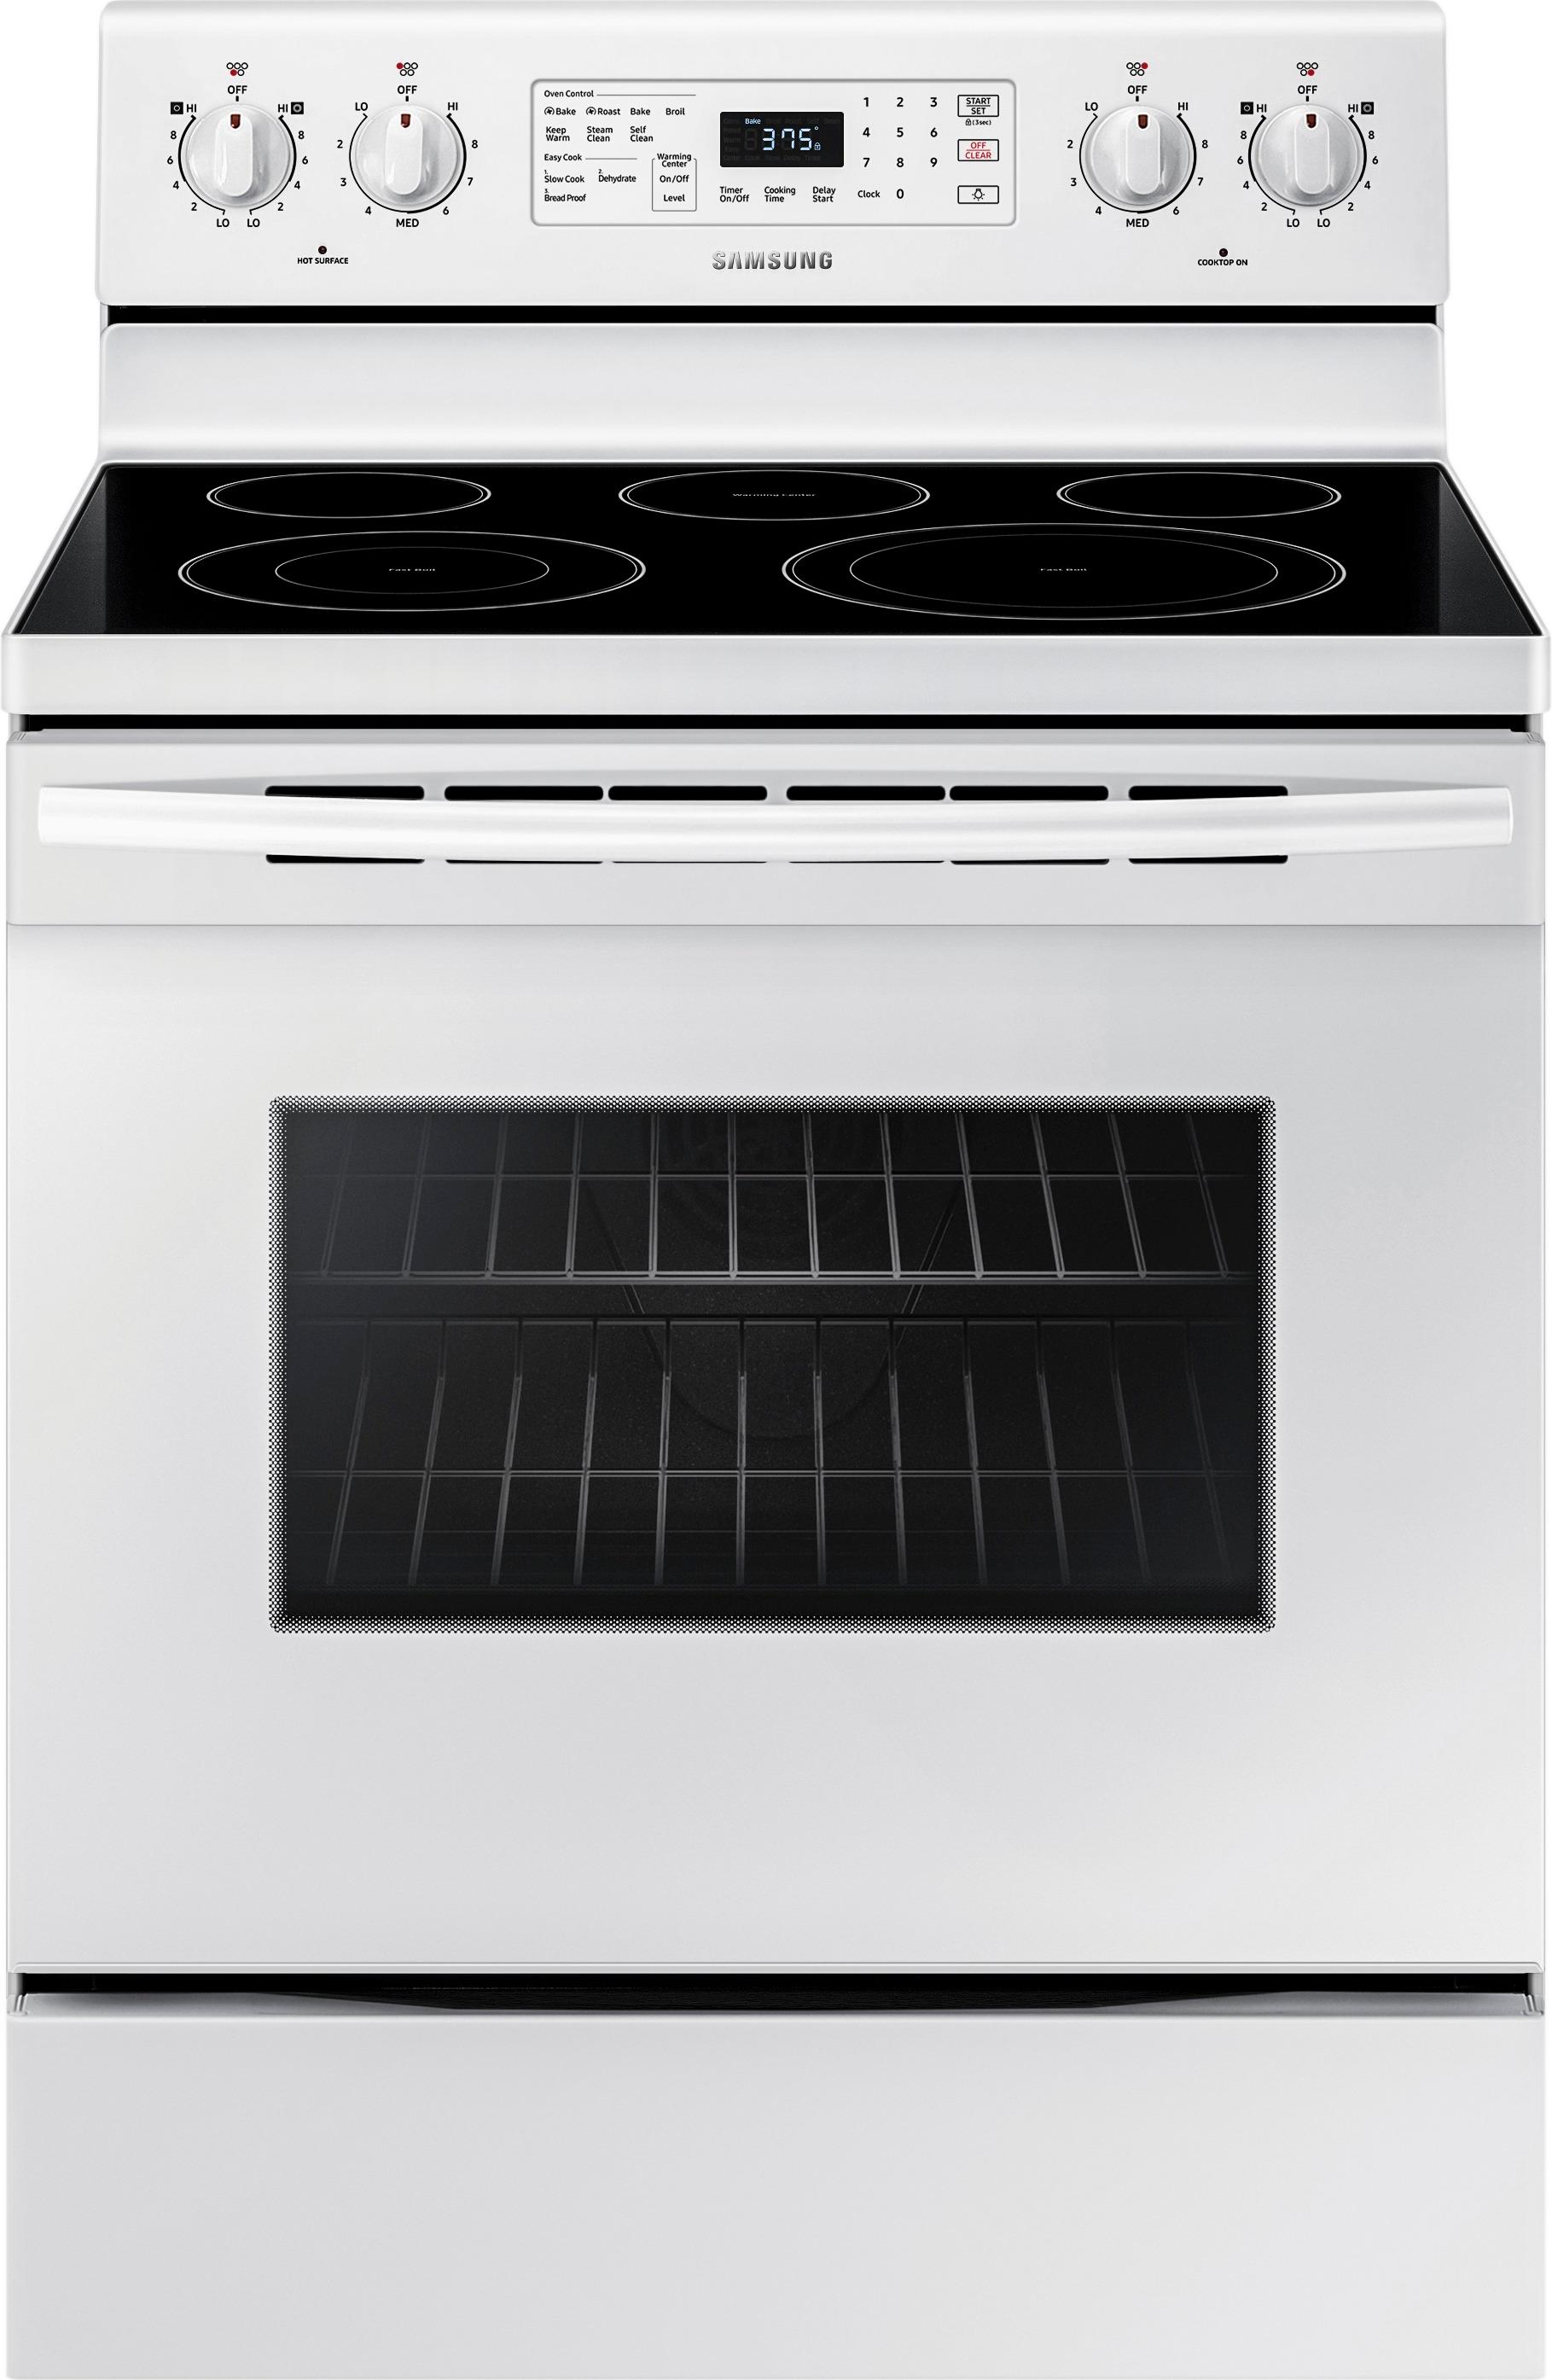 Samsung – 5.9 cu. ft. Convection Freestanding Electric Range – White